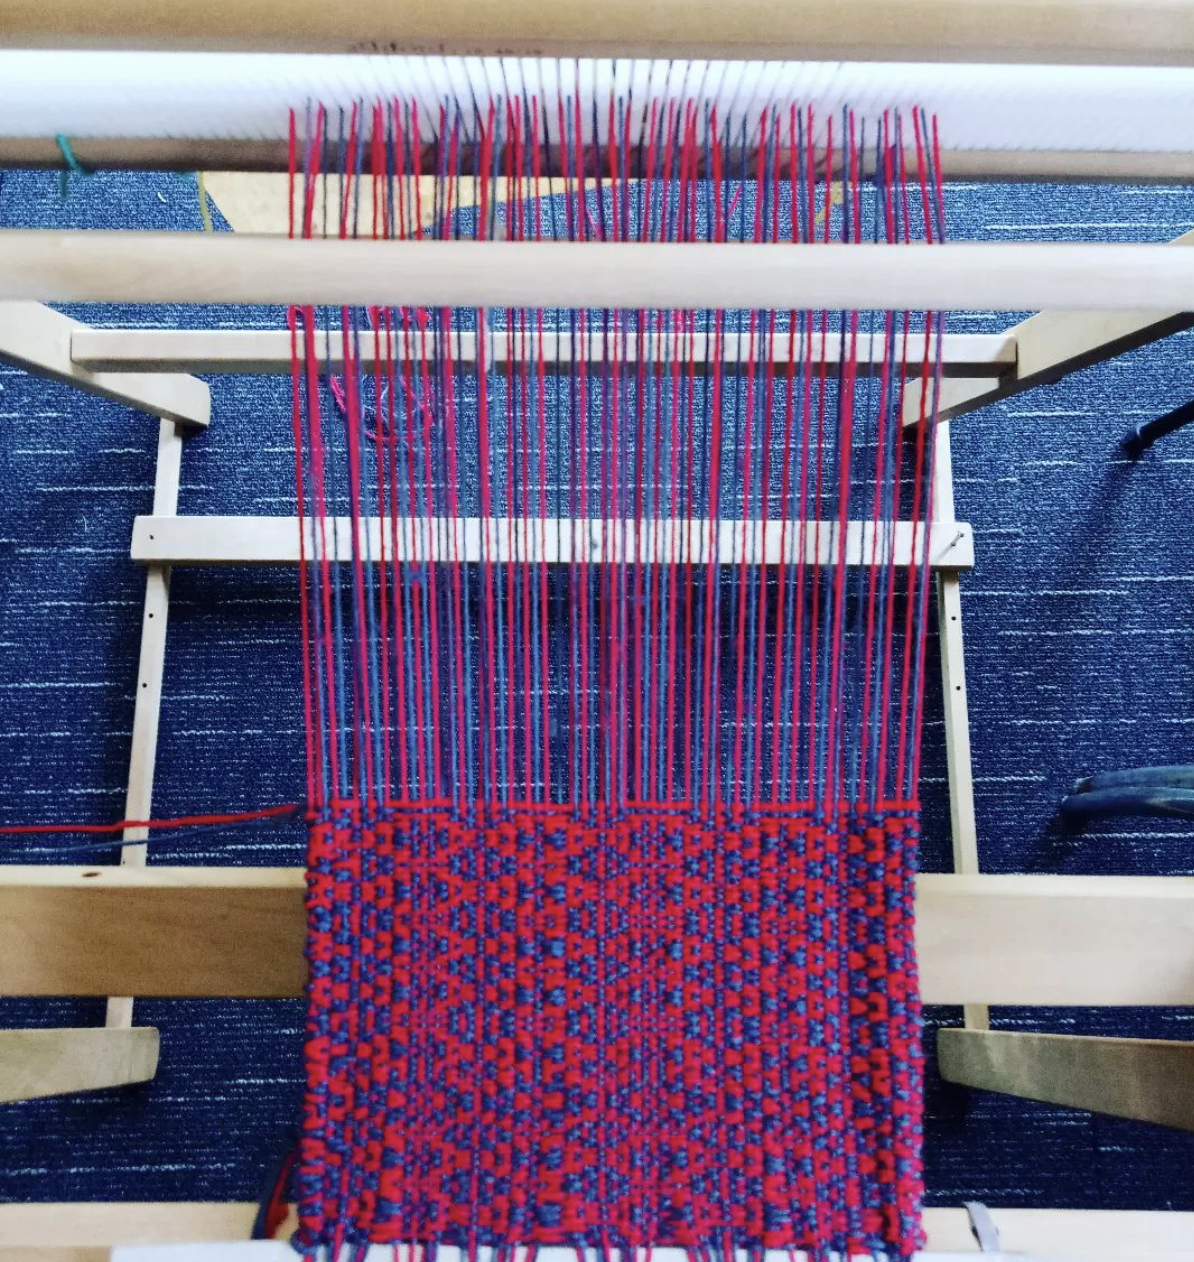 Simple and Complex Patterns on the rigid heddle loom